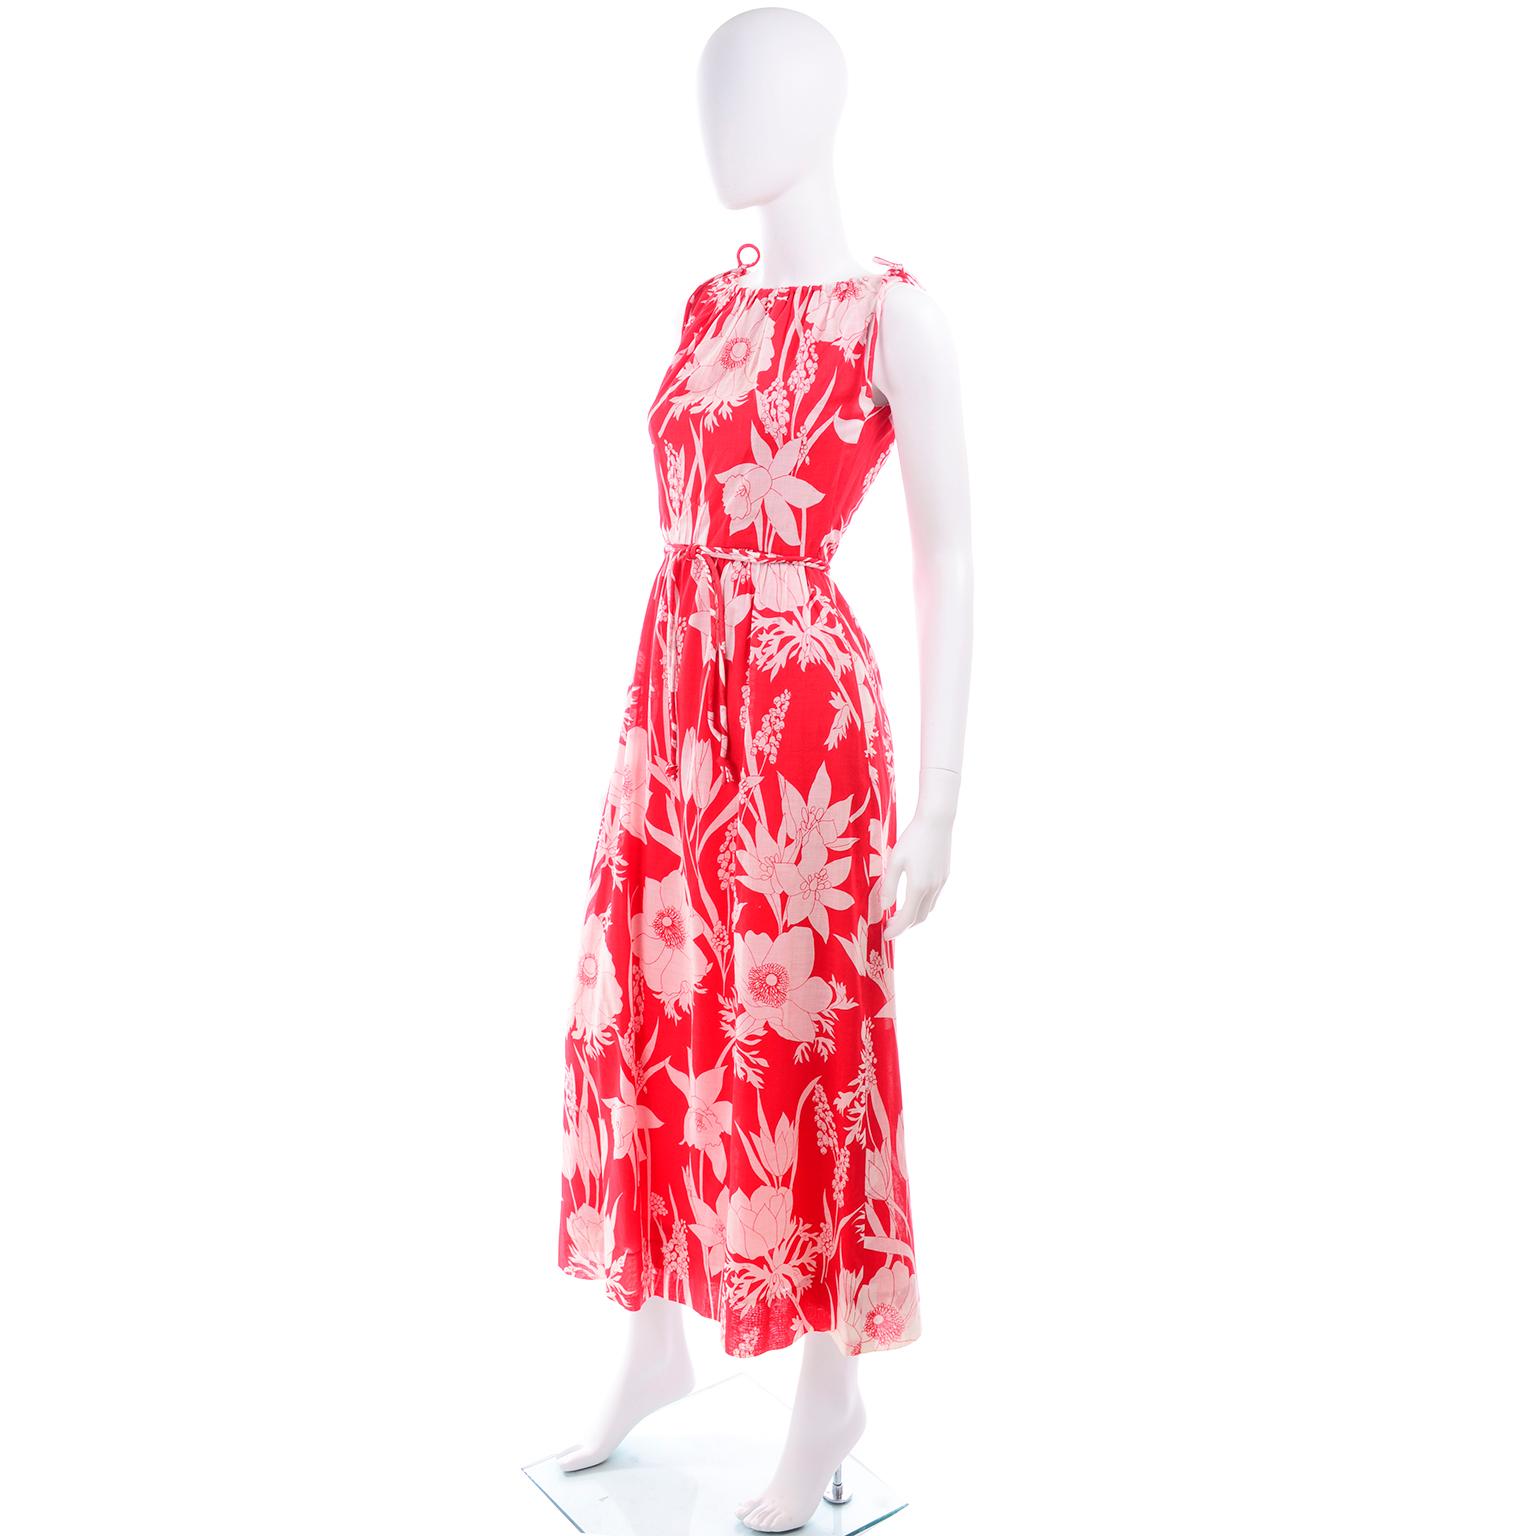 Adele Simpson Vintage 1970s Dress & Cape in Red & White Cotton Floral Print  3